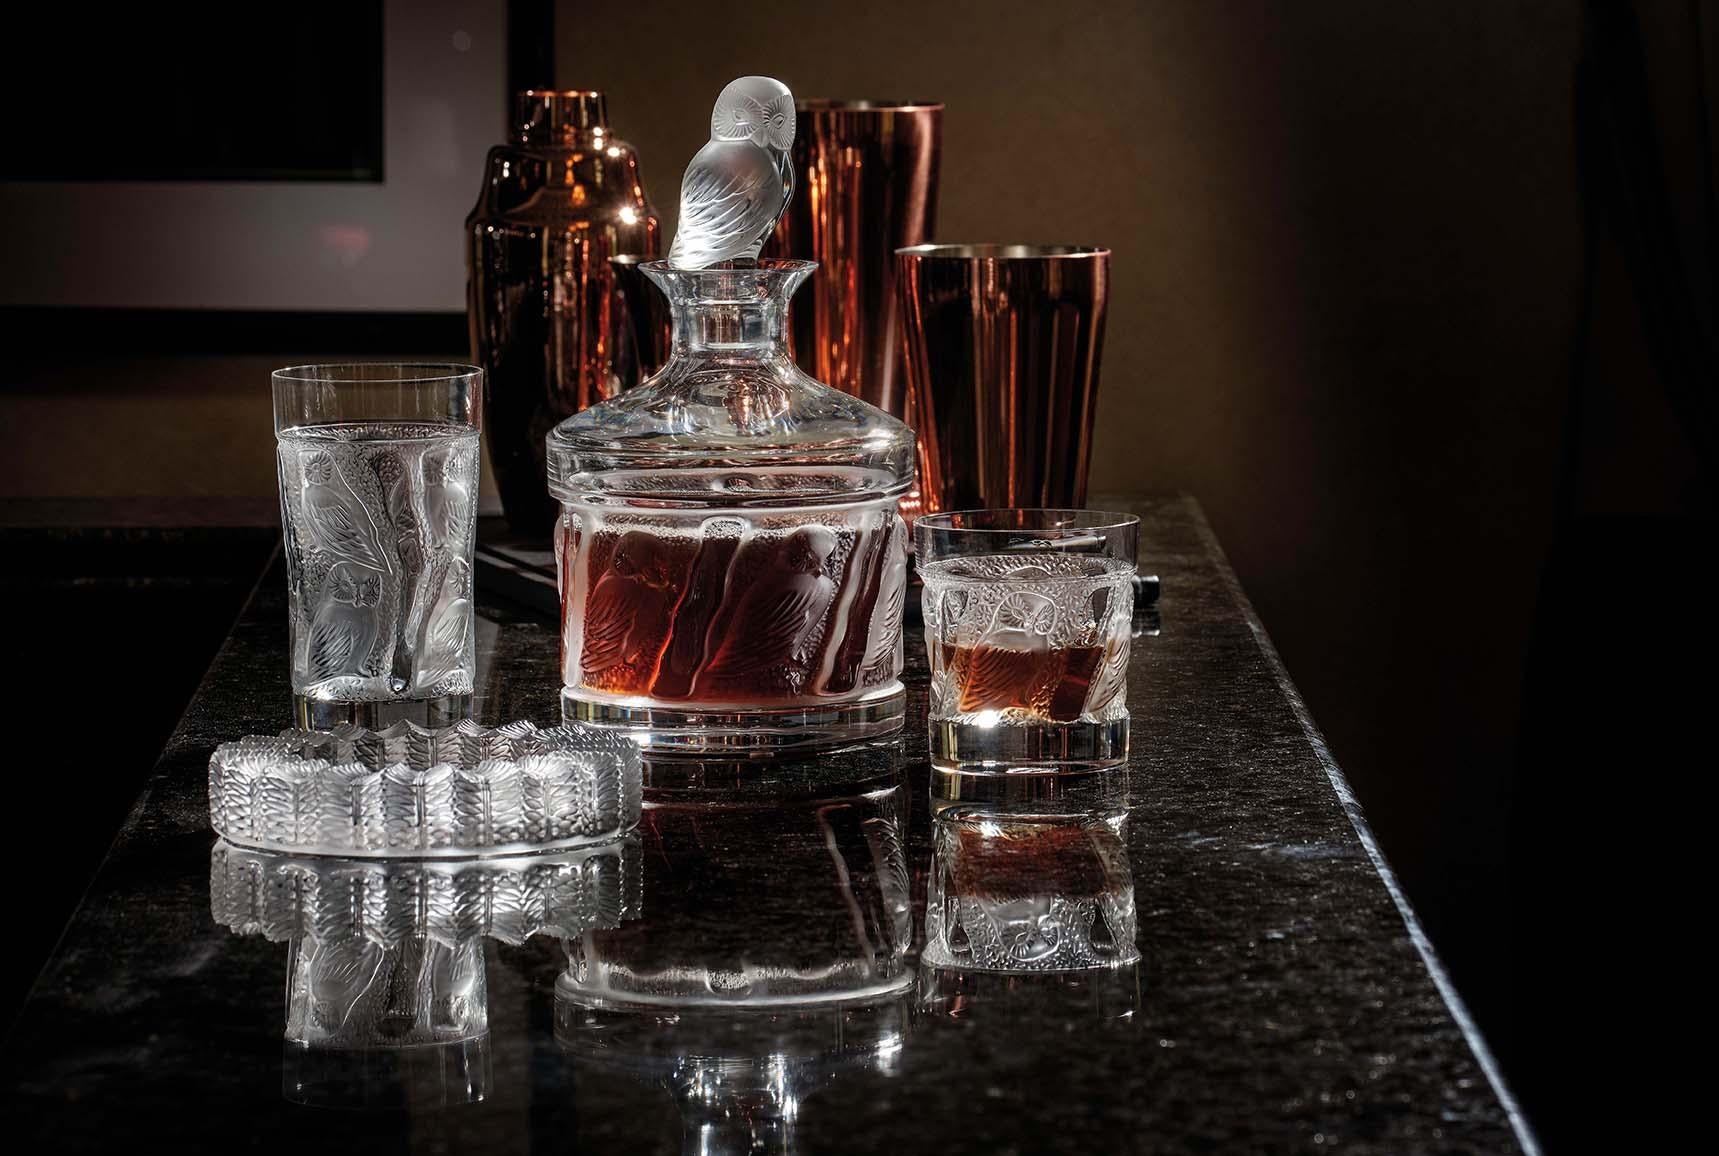 Designed by Marie-Claude Lalique in 1995, the Owl collection has become synonymous with the enjoyment of fine spirits. The highly detailed design of the tumbler, inspired by the wise and mysterious owl, is enhanced by the rich hues of the rarest of